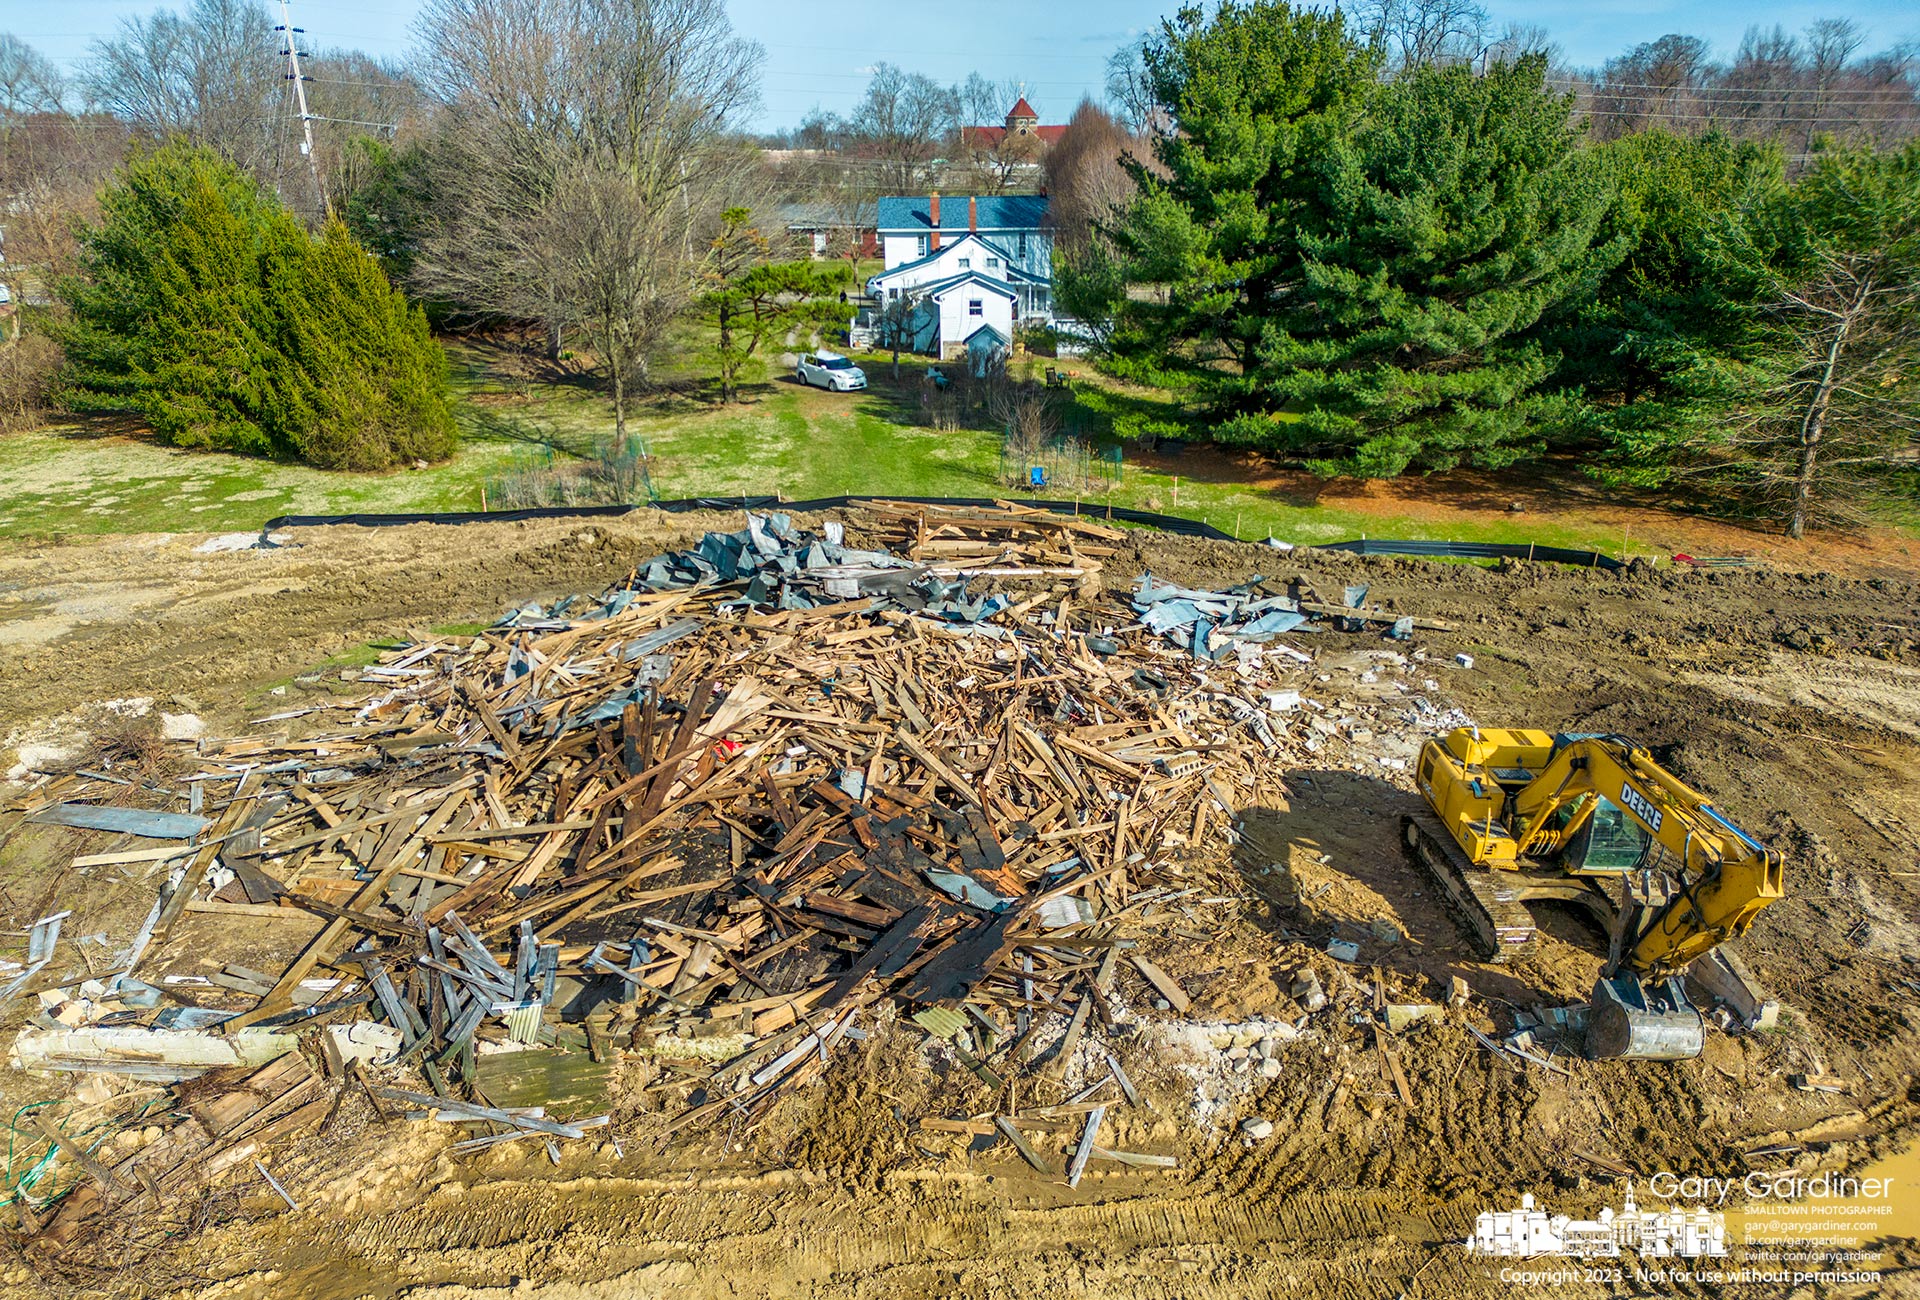 Rubble remains after a demolition crew tore down a barn on land being developed on North West Street for townhomes. My Final Photo for March 6, 2023.